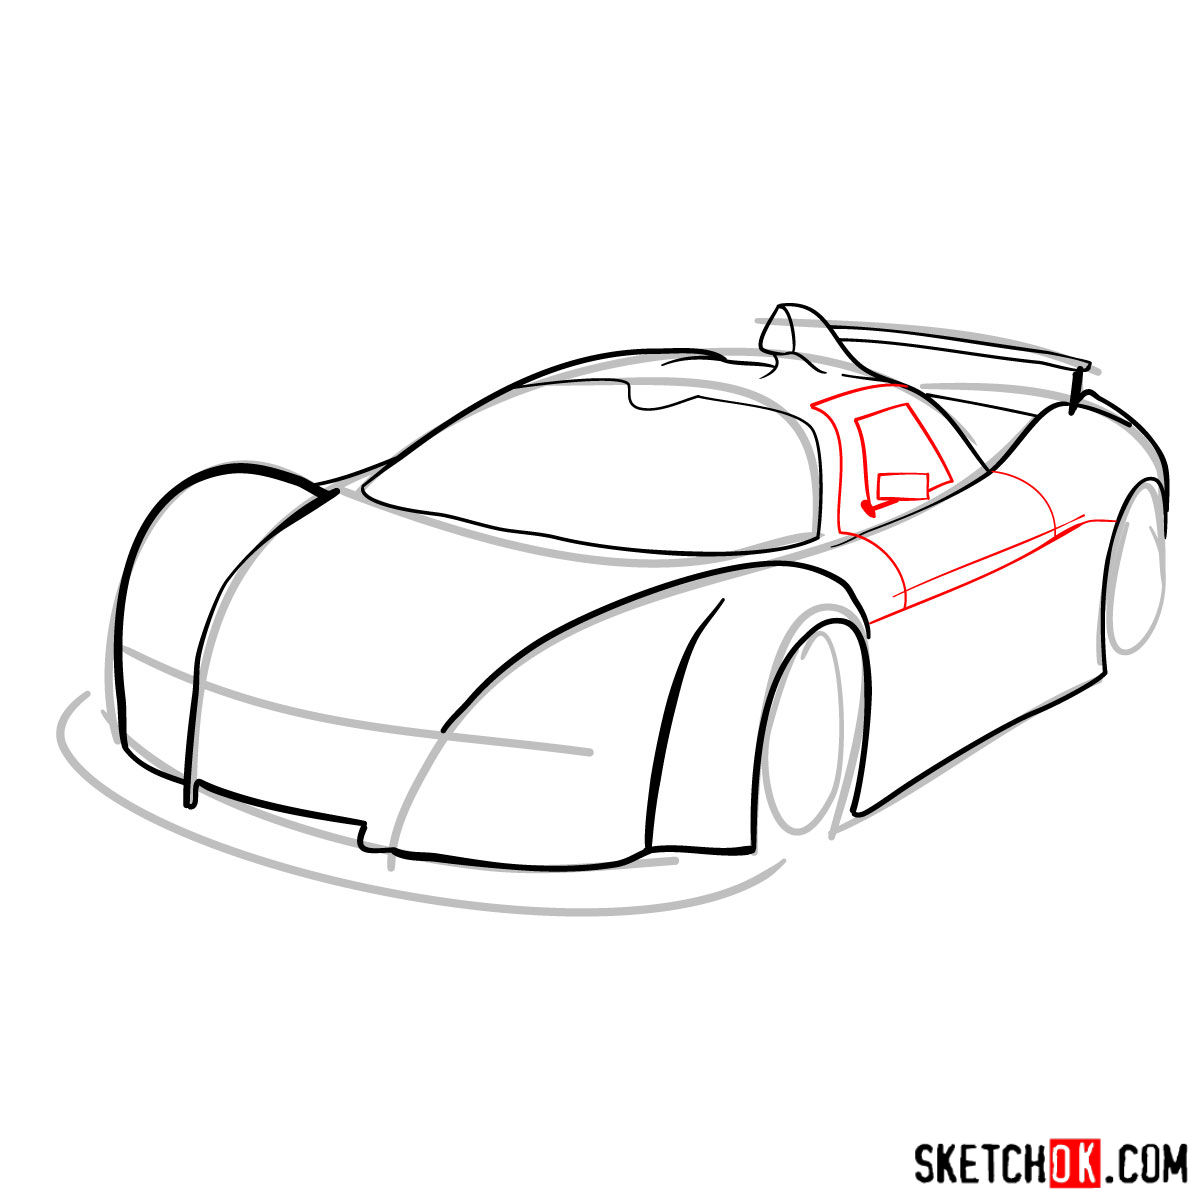 How to draw Gumpert Apolo Sport 2005 - step 06